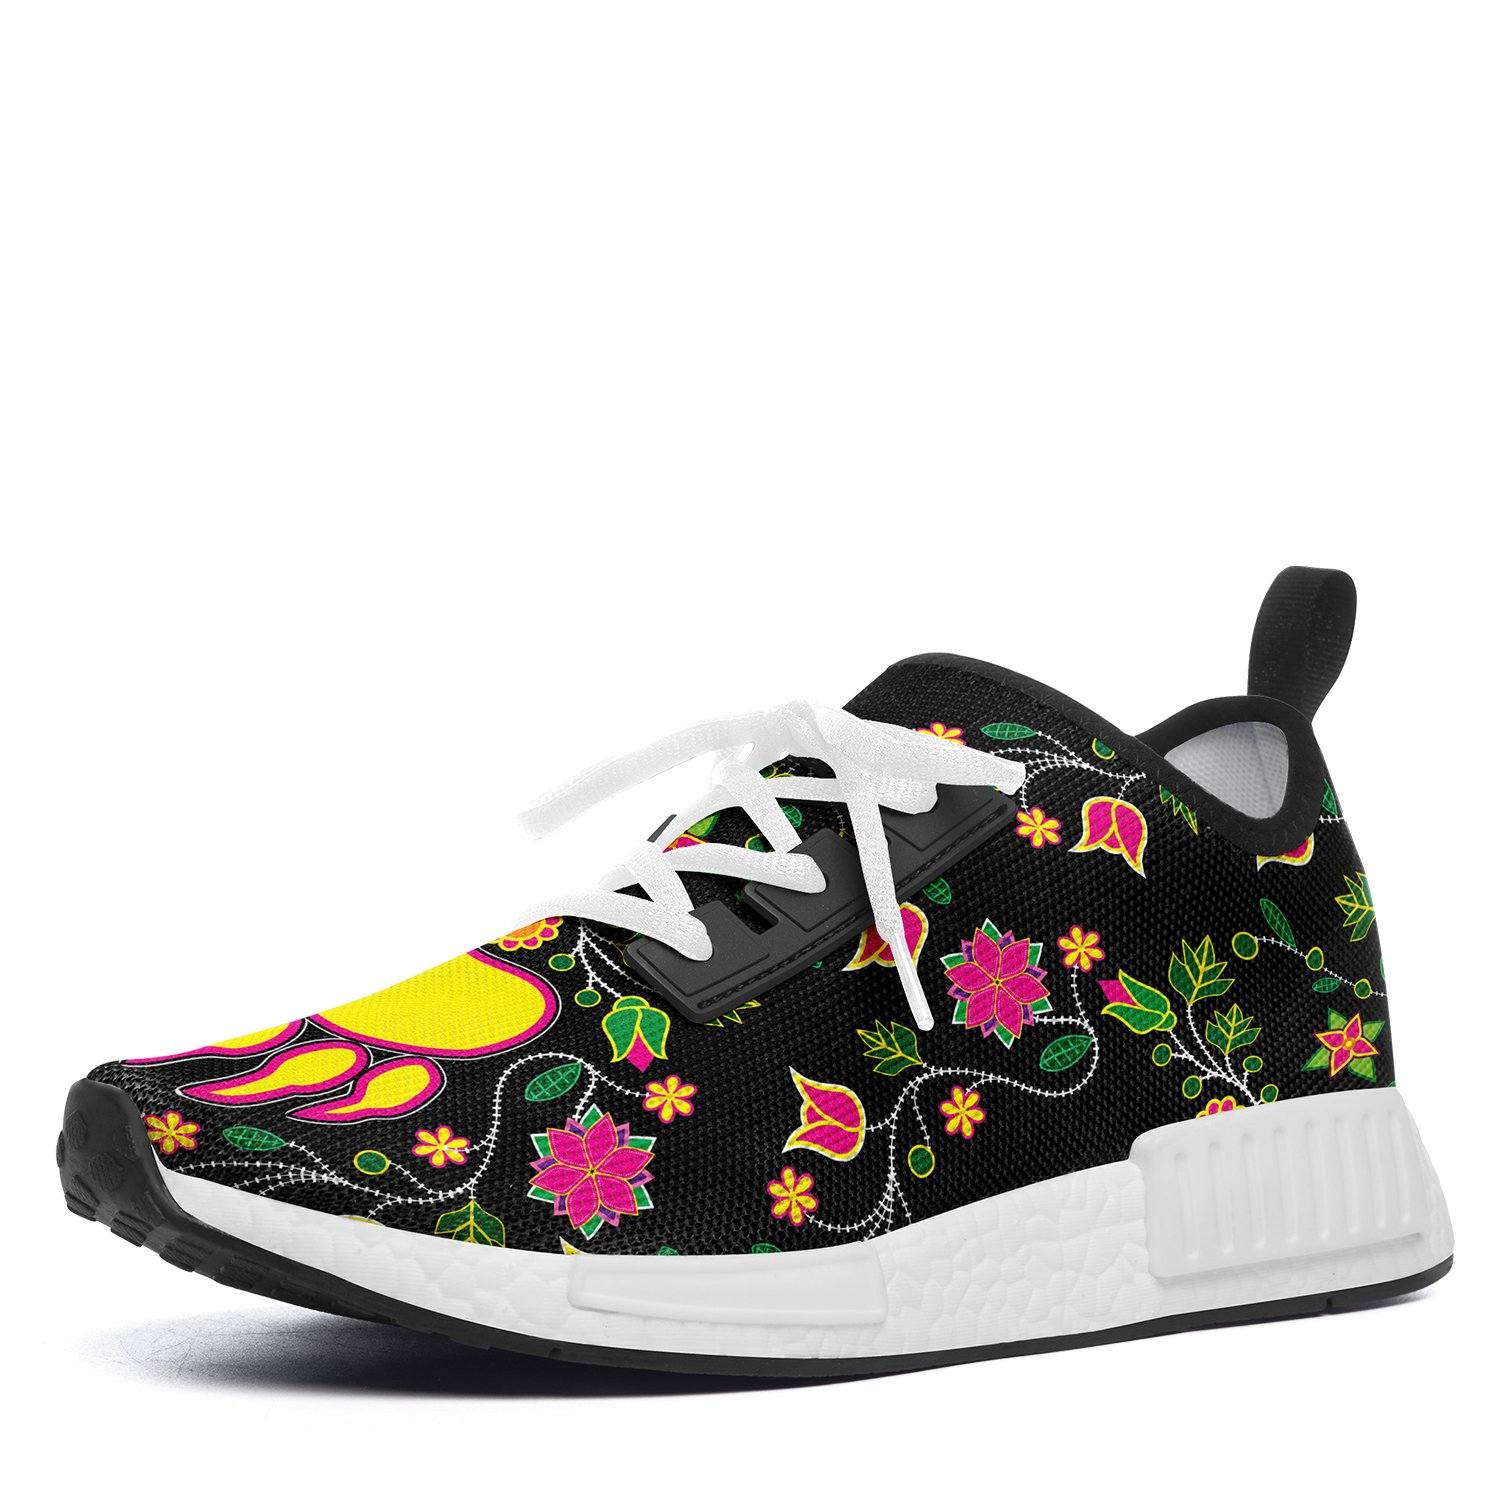 Floral Bearpaw Draco Running Shoes 49 Dzine 